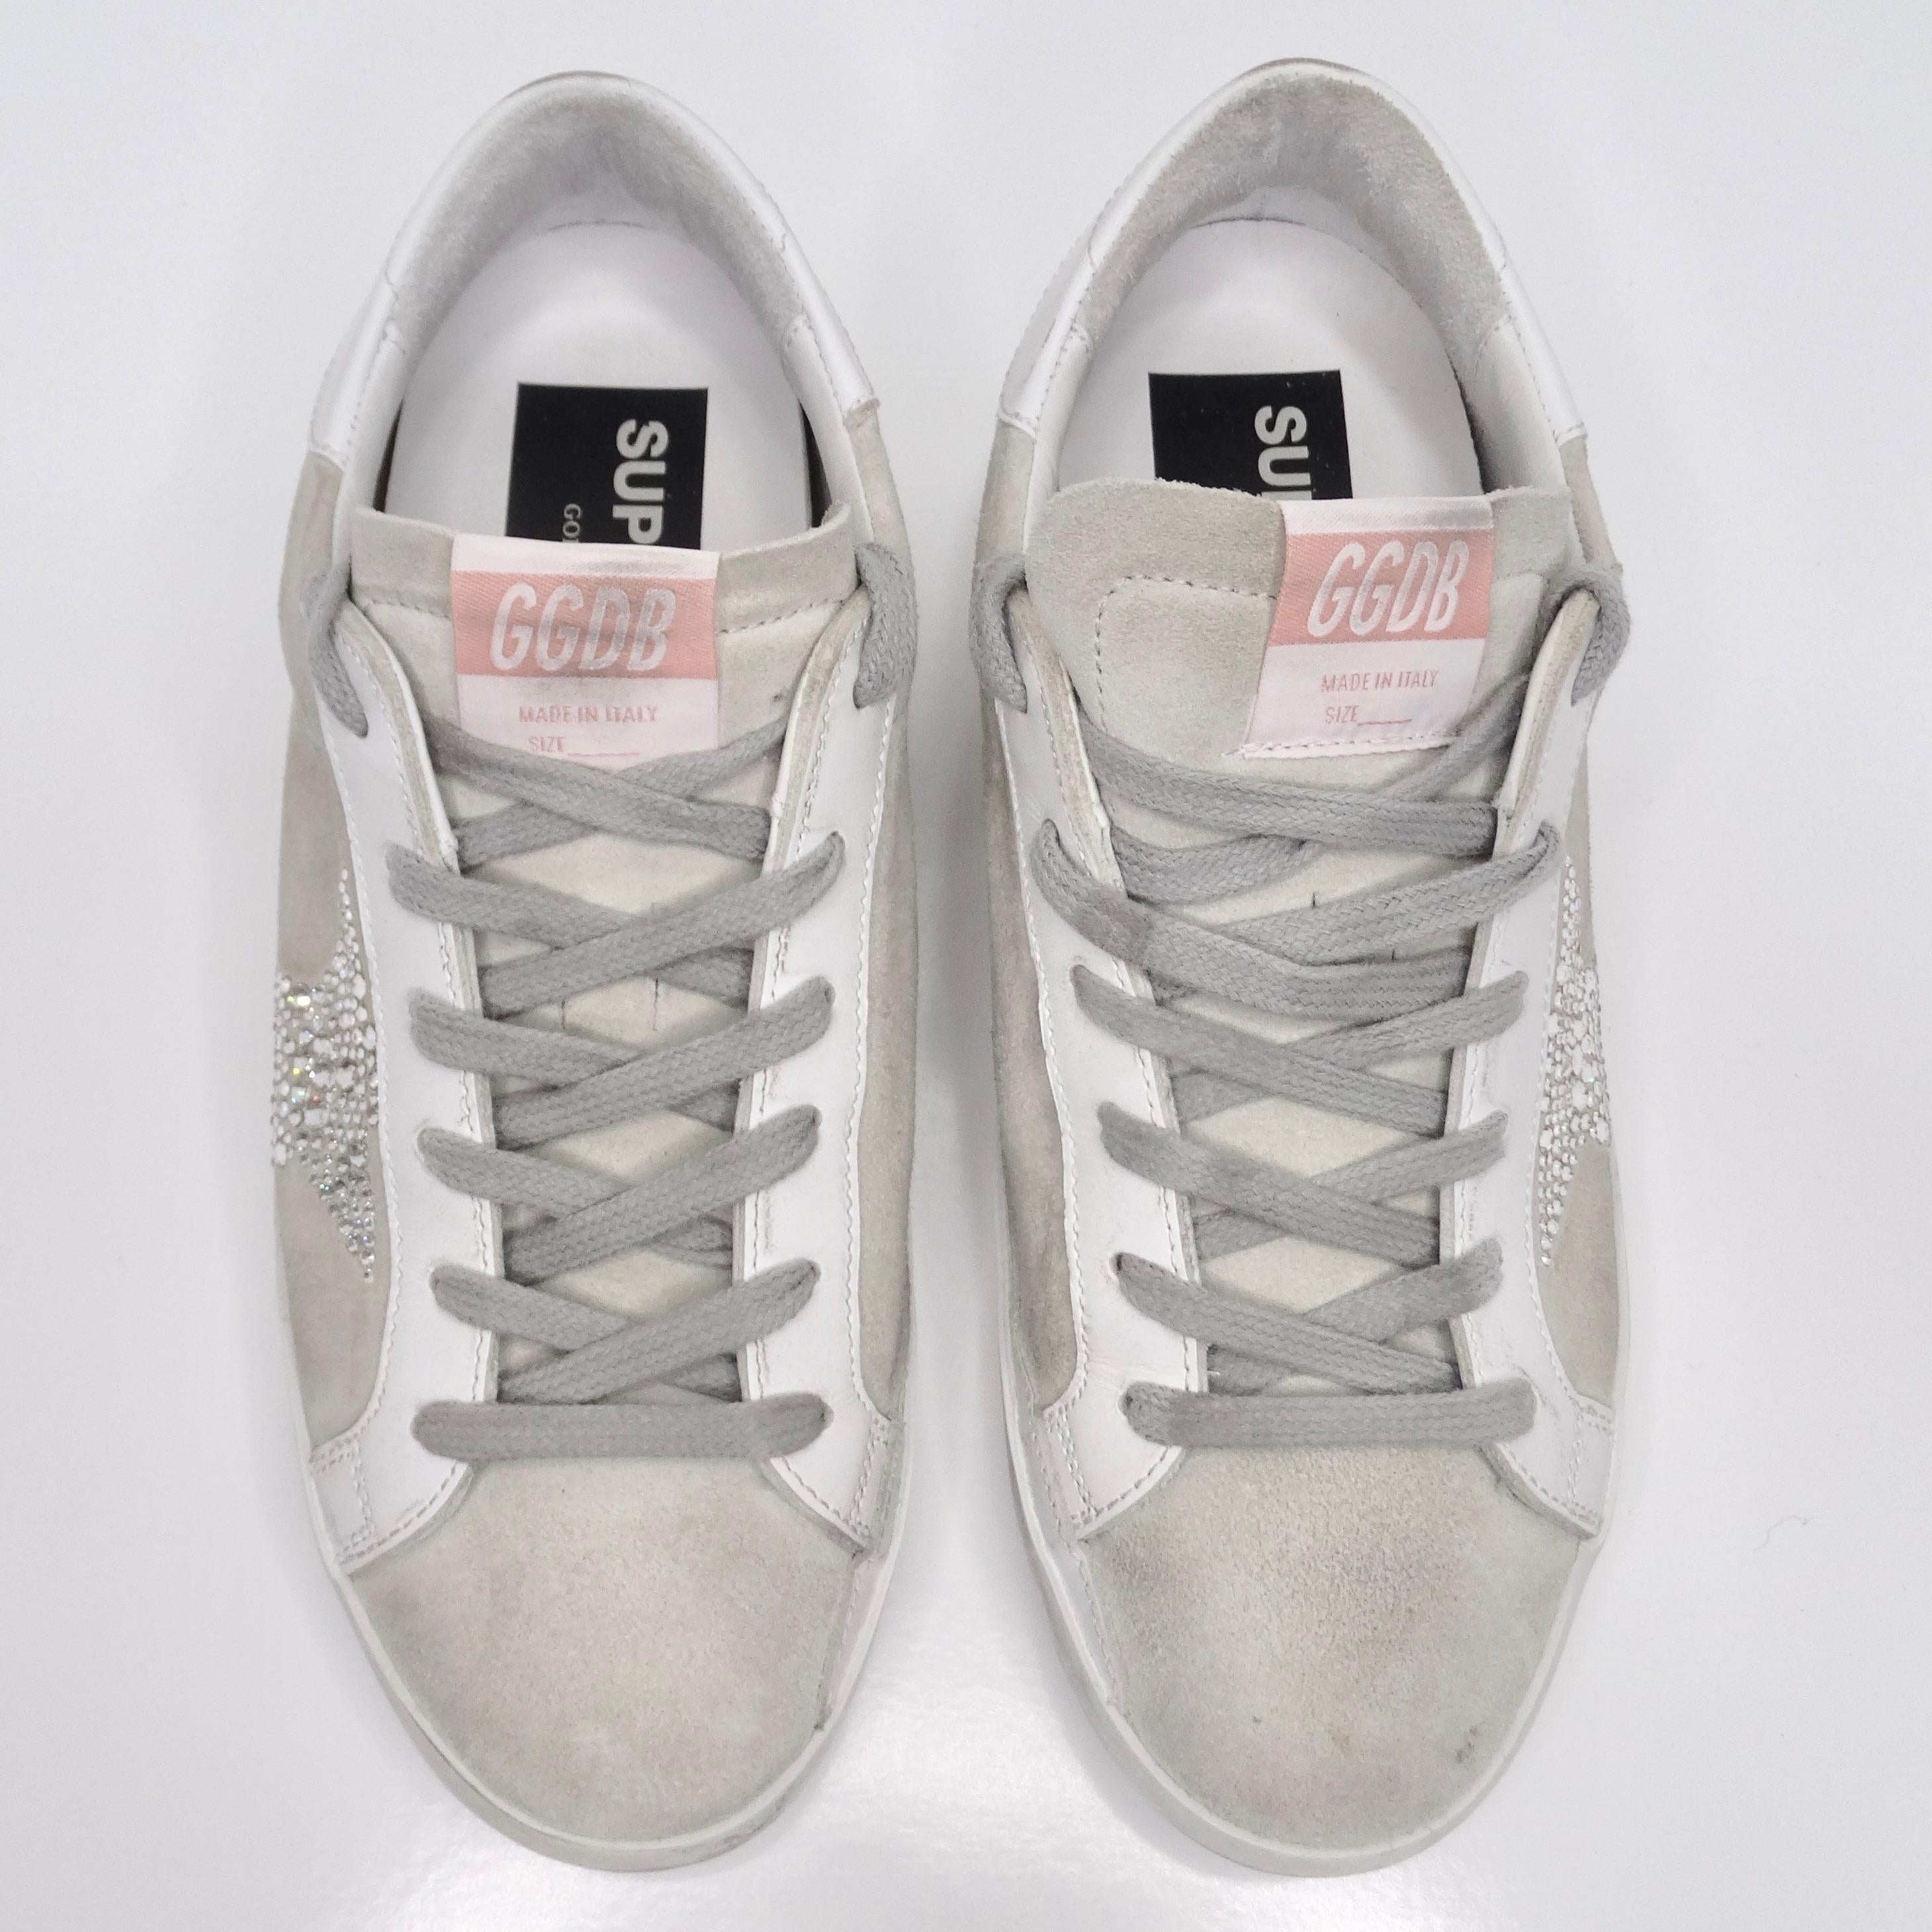 Elevate your footwear collection with the opulent charm of Golden Goose Superstar Swarovski Crystal Suede Sneakers. Crafted in an exquisite shade of grey suede, these low top sneakers boast an unmistakable Golden Goose distressed motif that exudes